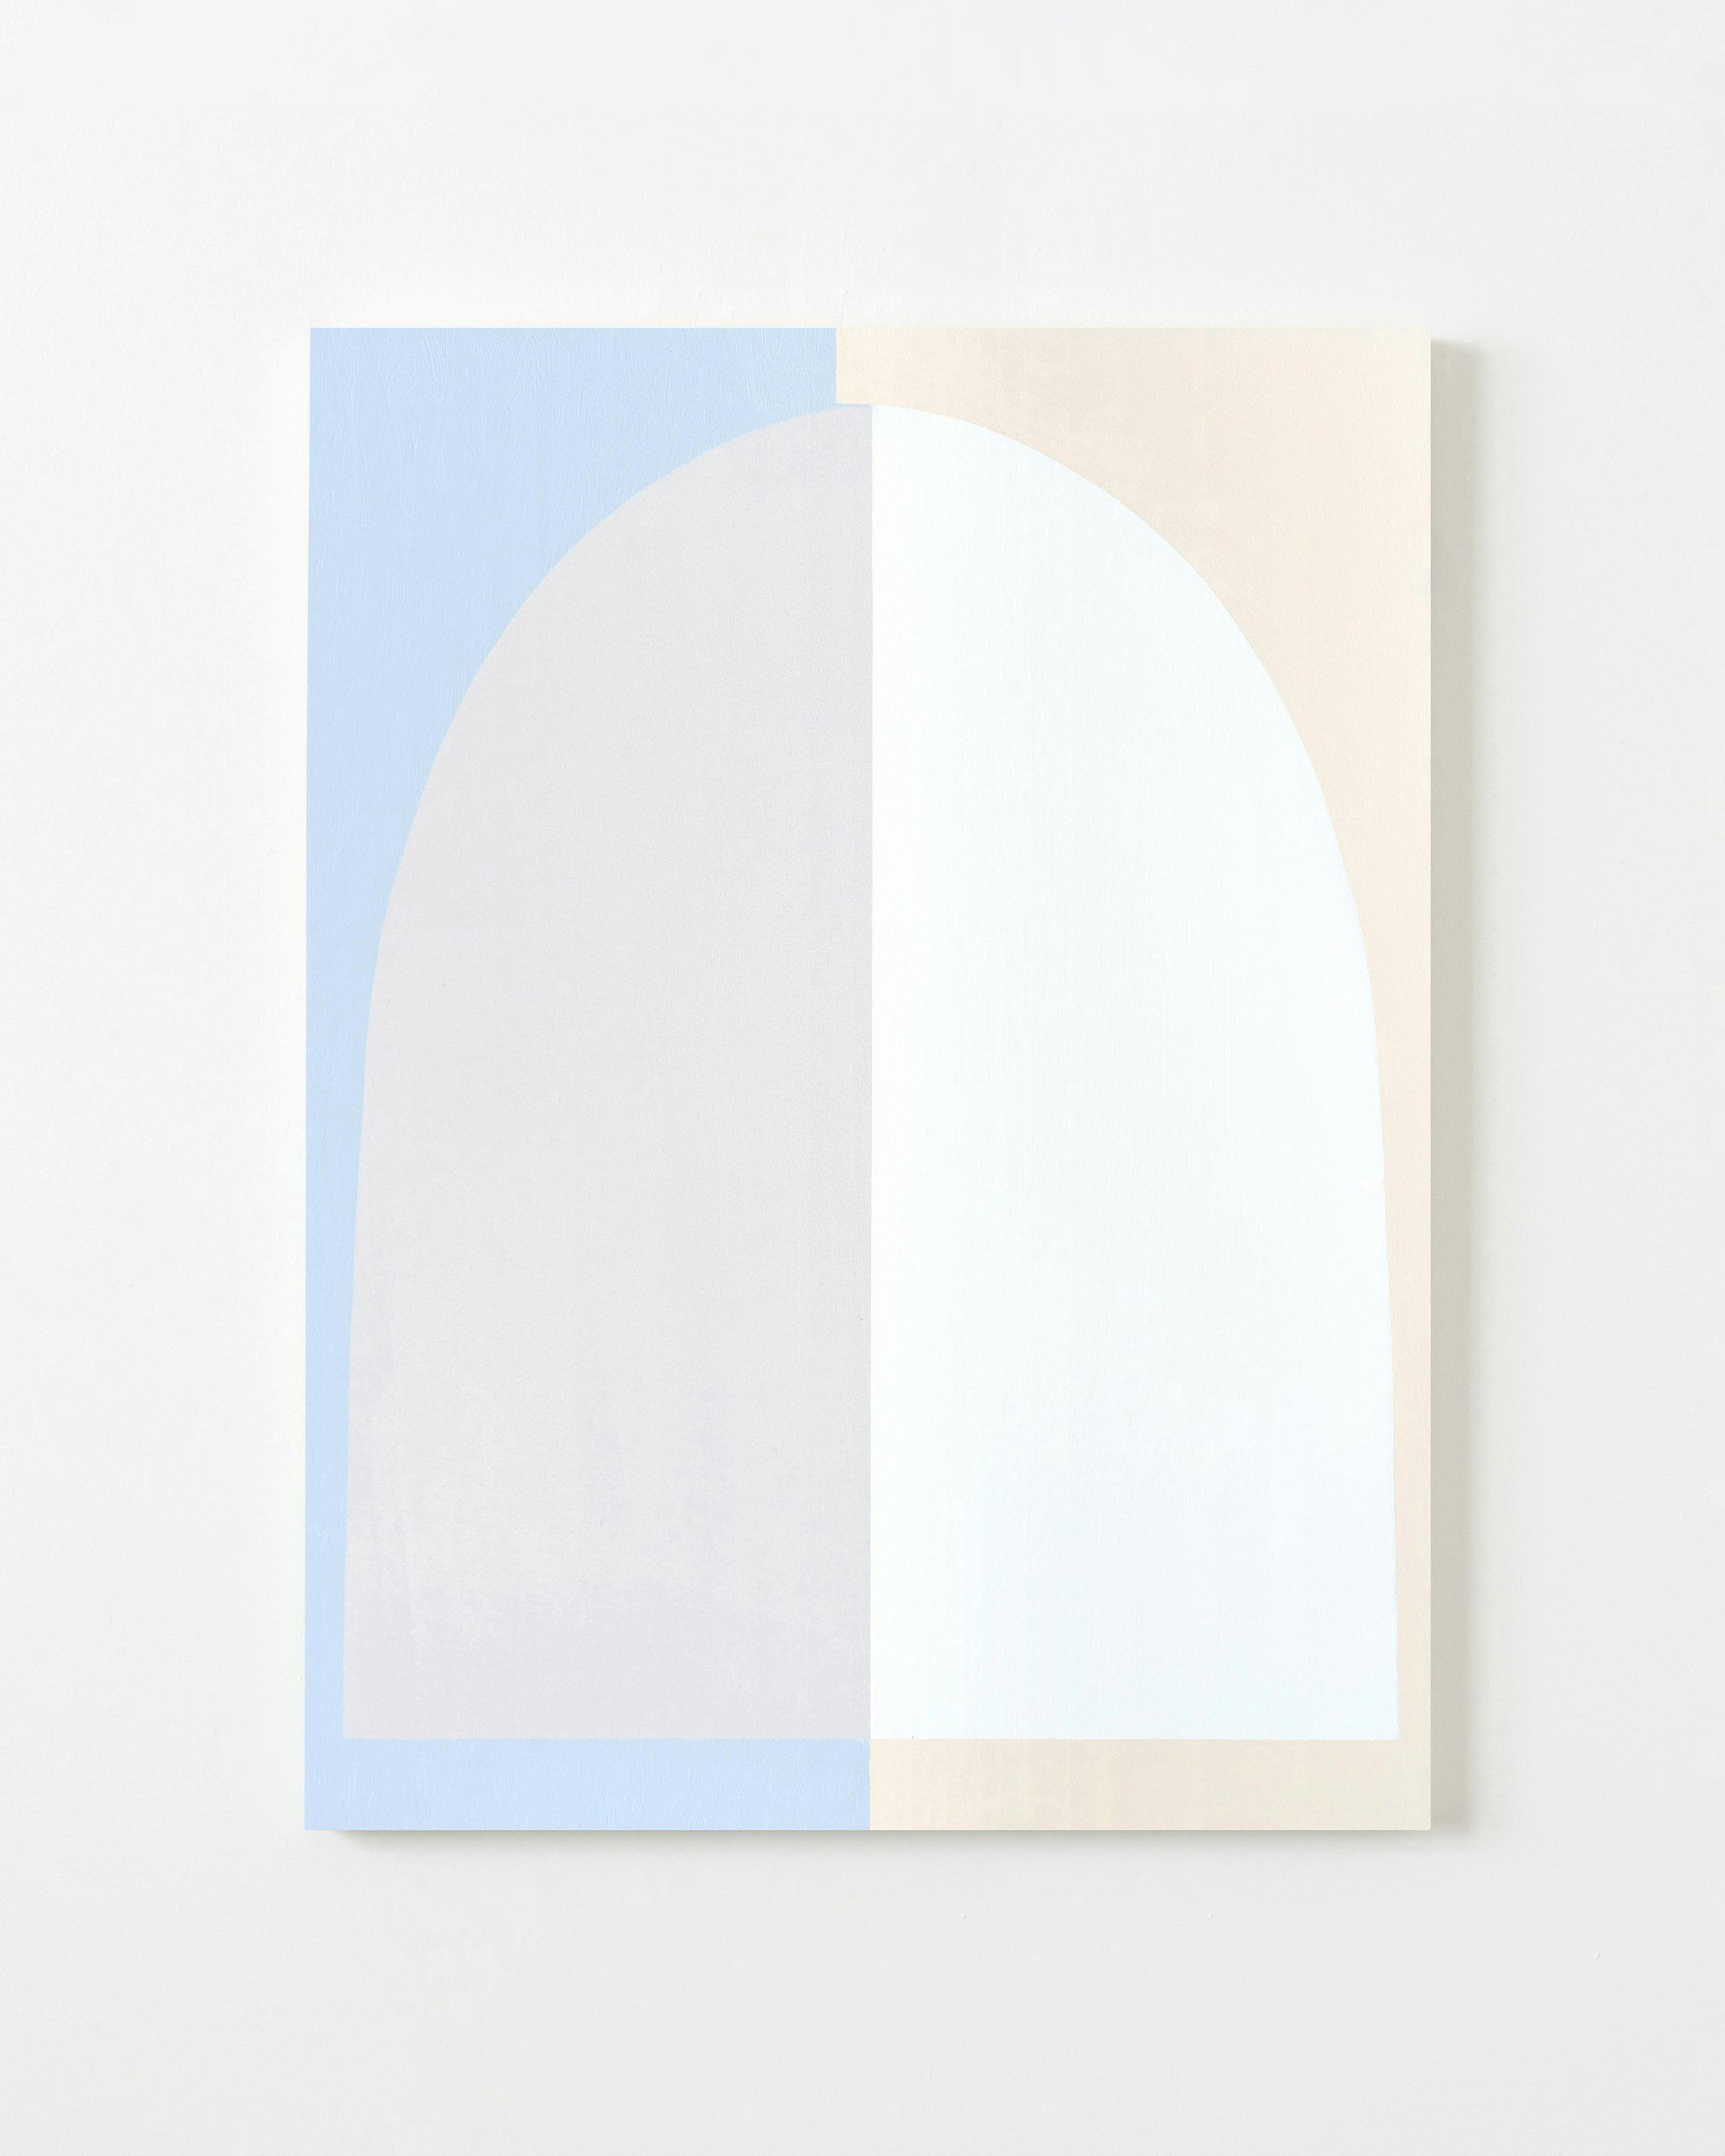 Aschely Vaughan Cone - Arch in Blue Shadow - Painting